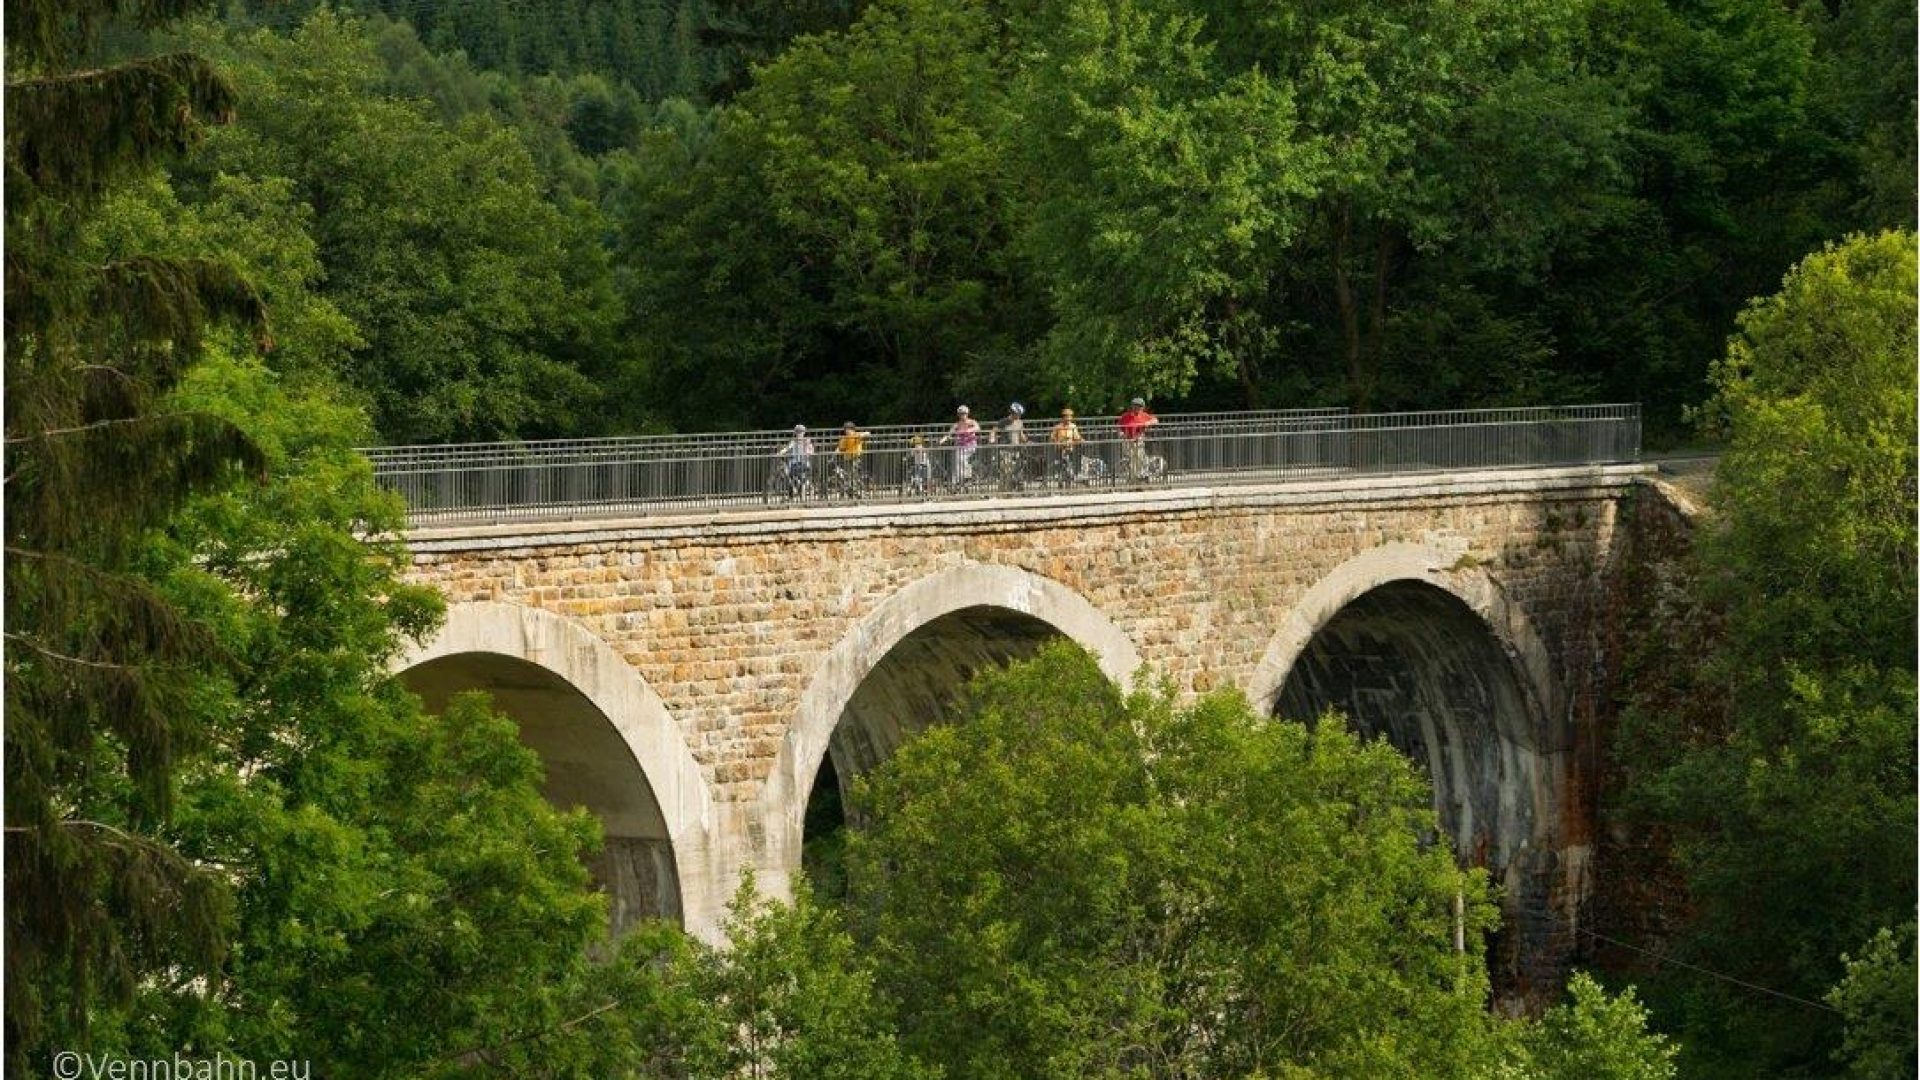 Discover Europe in a different way through greenways